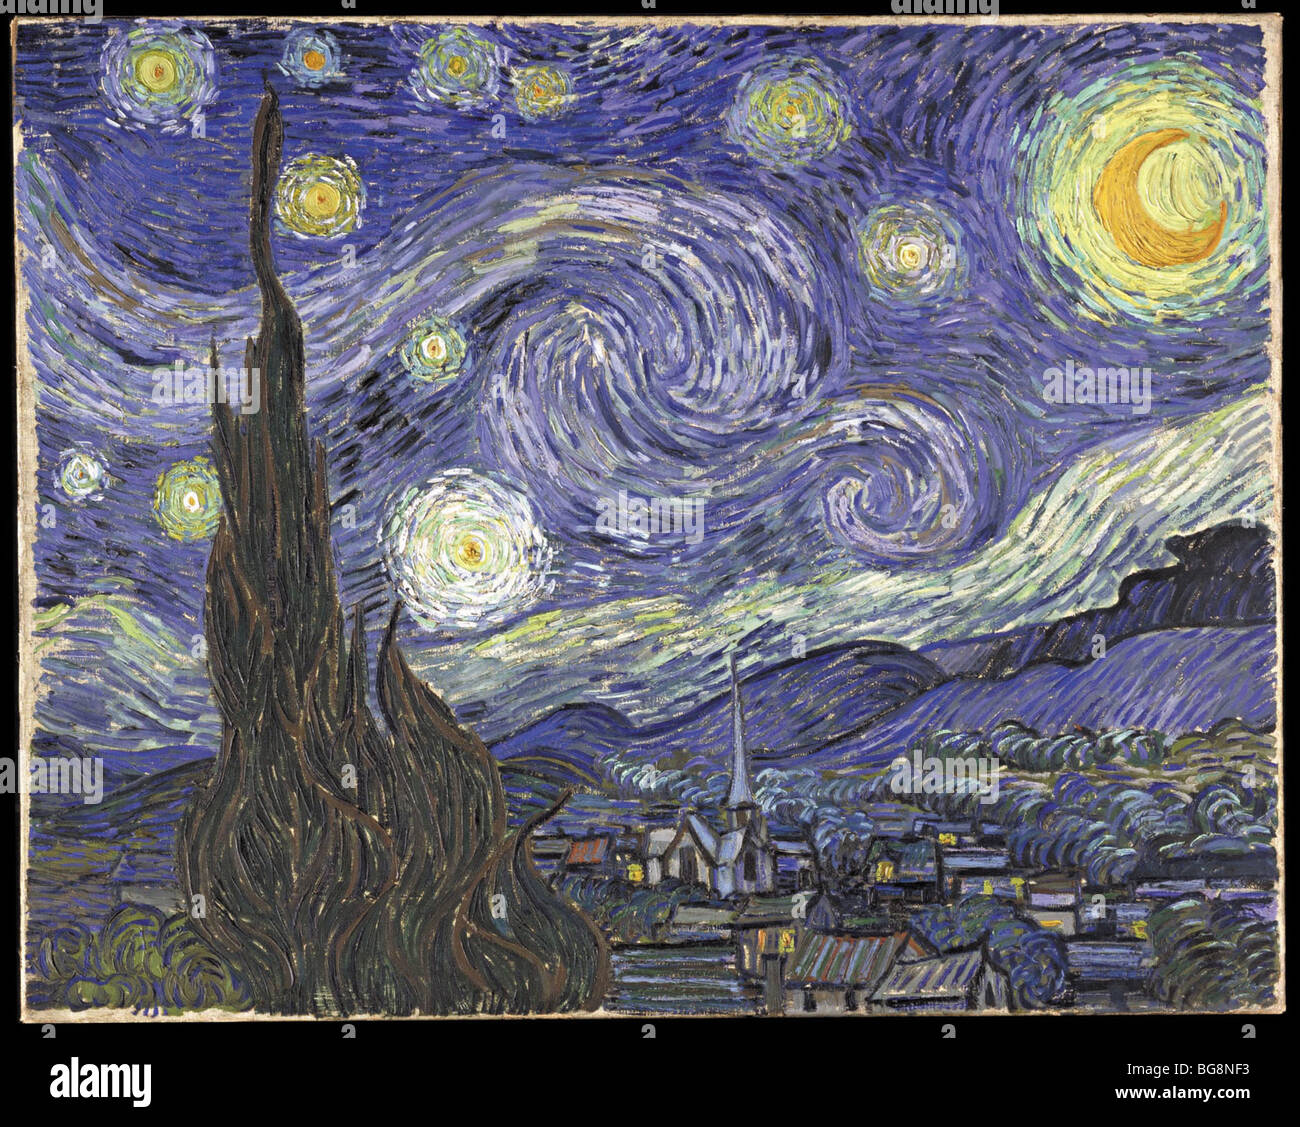 Starry Night by Vincent van Gogh, oil on canvas Stock Photo